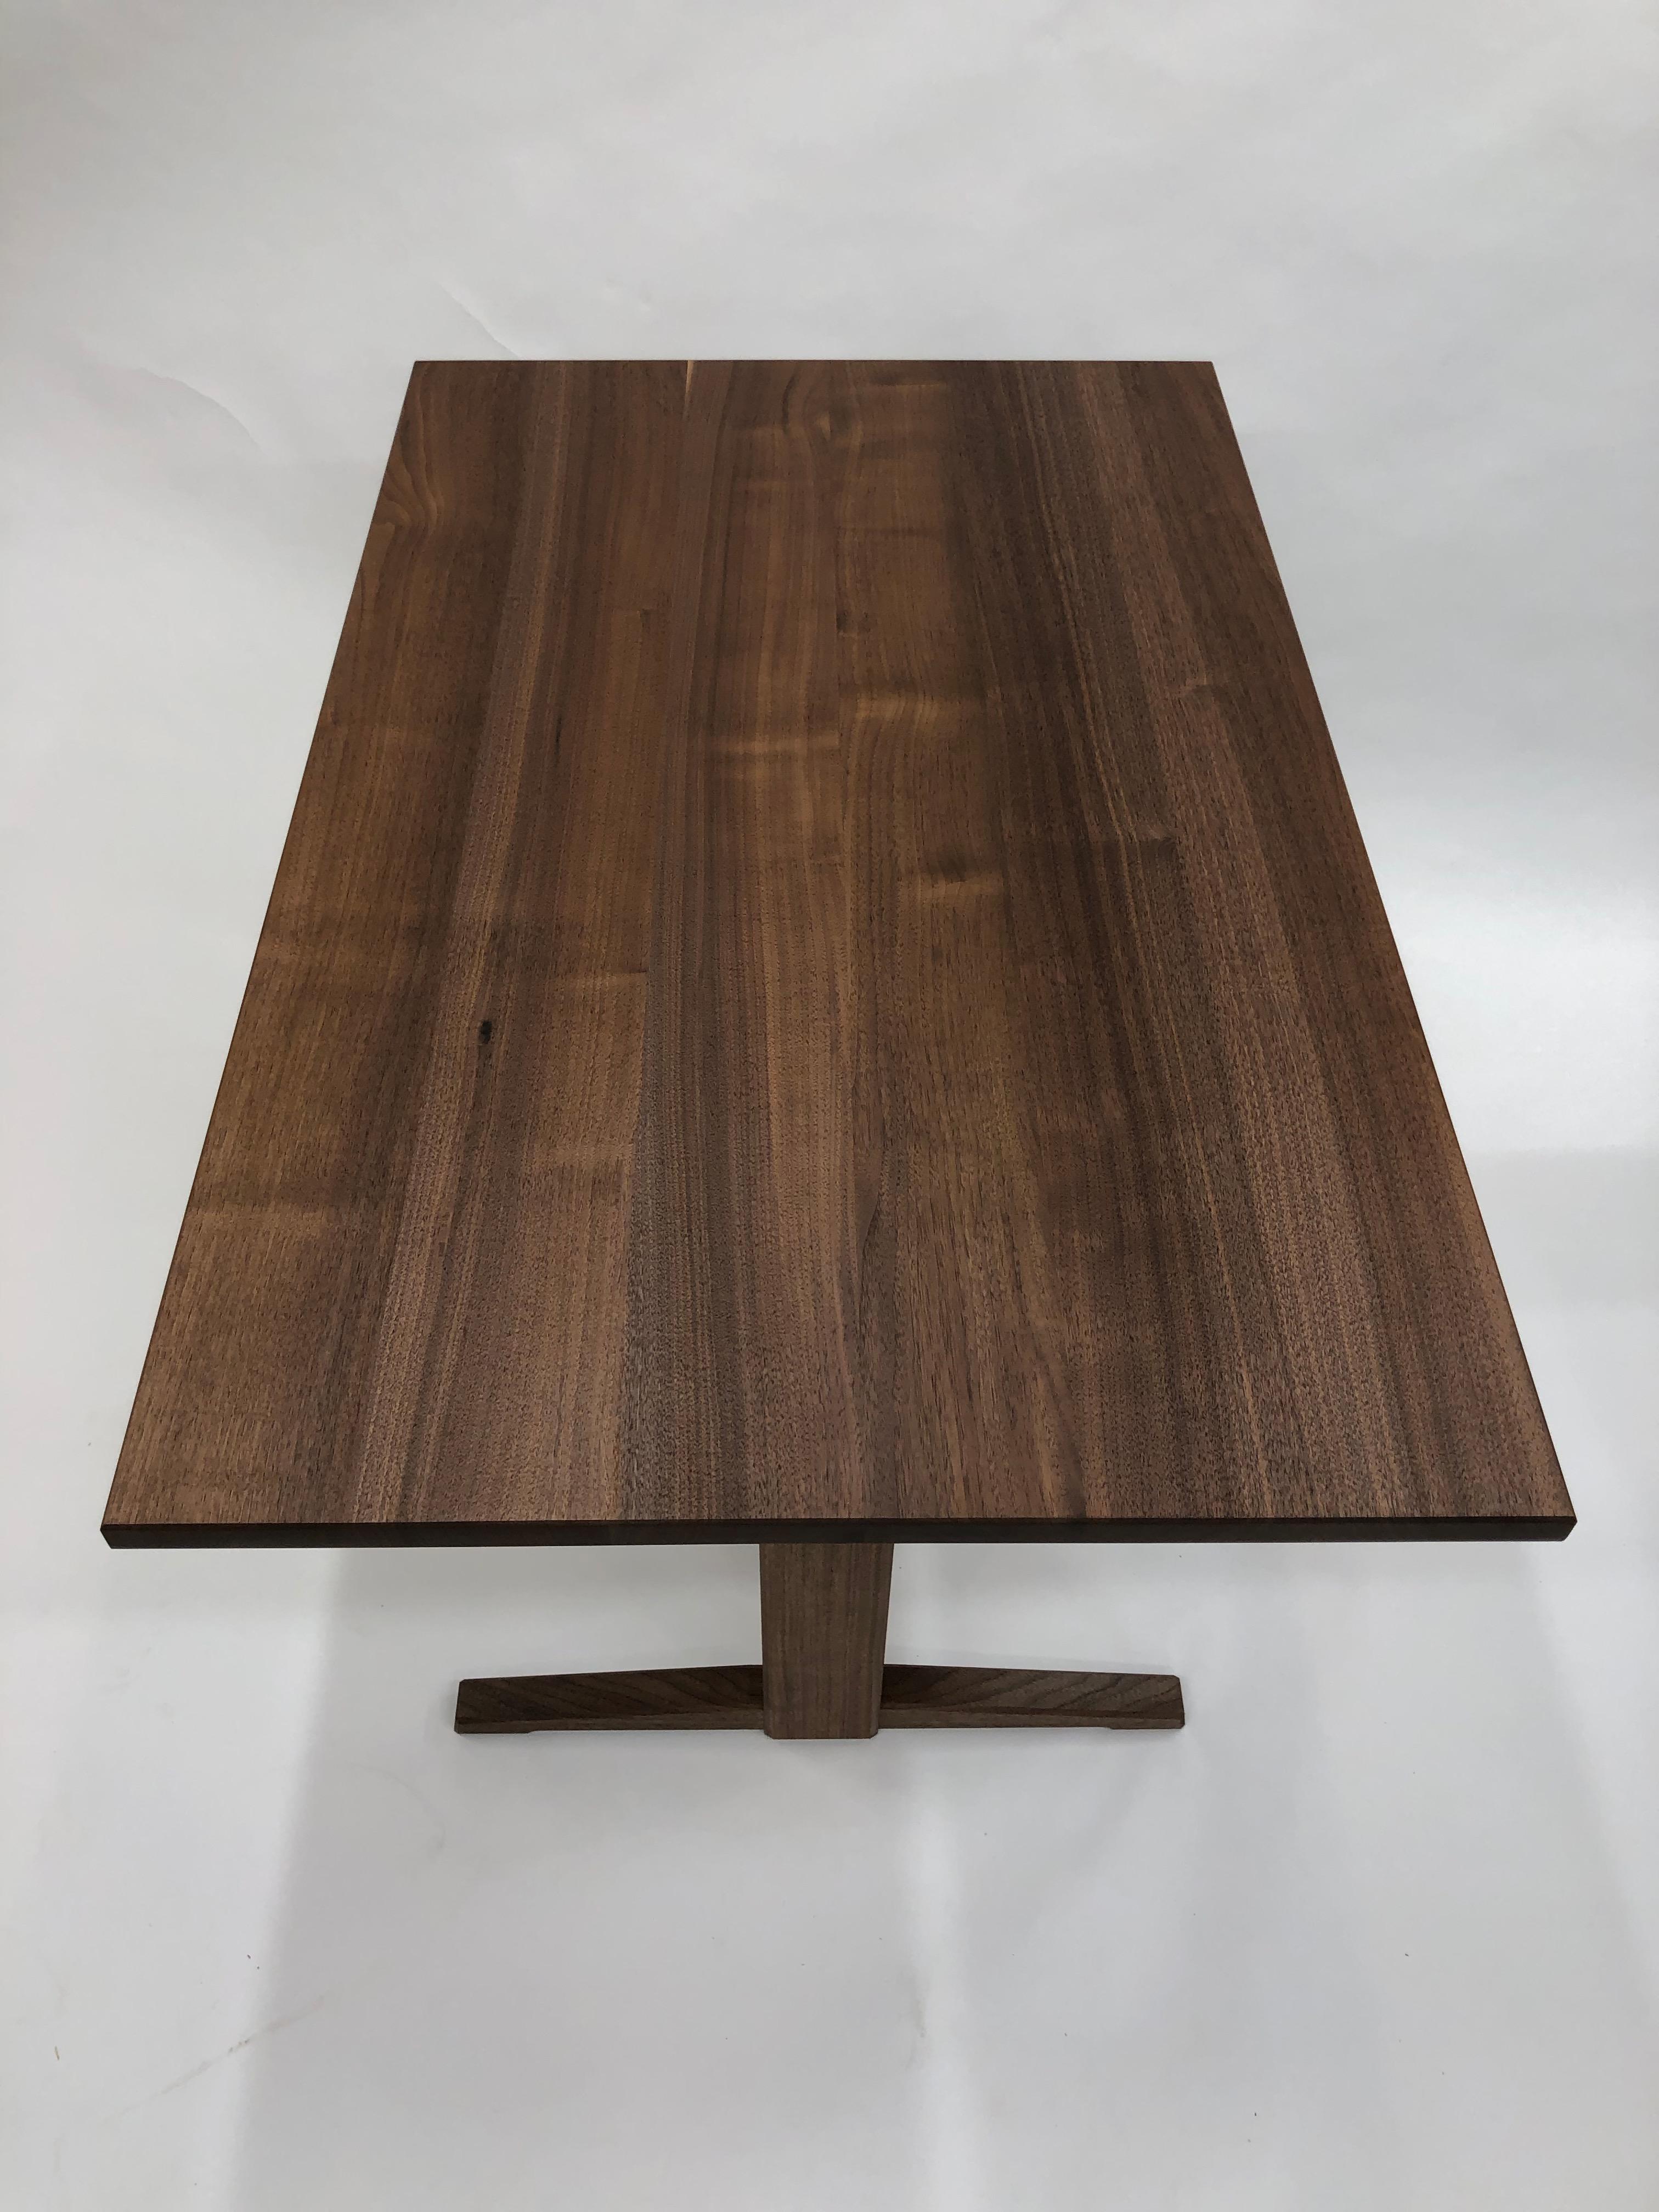 Dining table in quarter sawn walnut featuring a trestle base, carefully constructed utilizing interlocking joinery and without metal hardware or screws. The construction of this tables follows the technique of Japanese timber joinery to create a